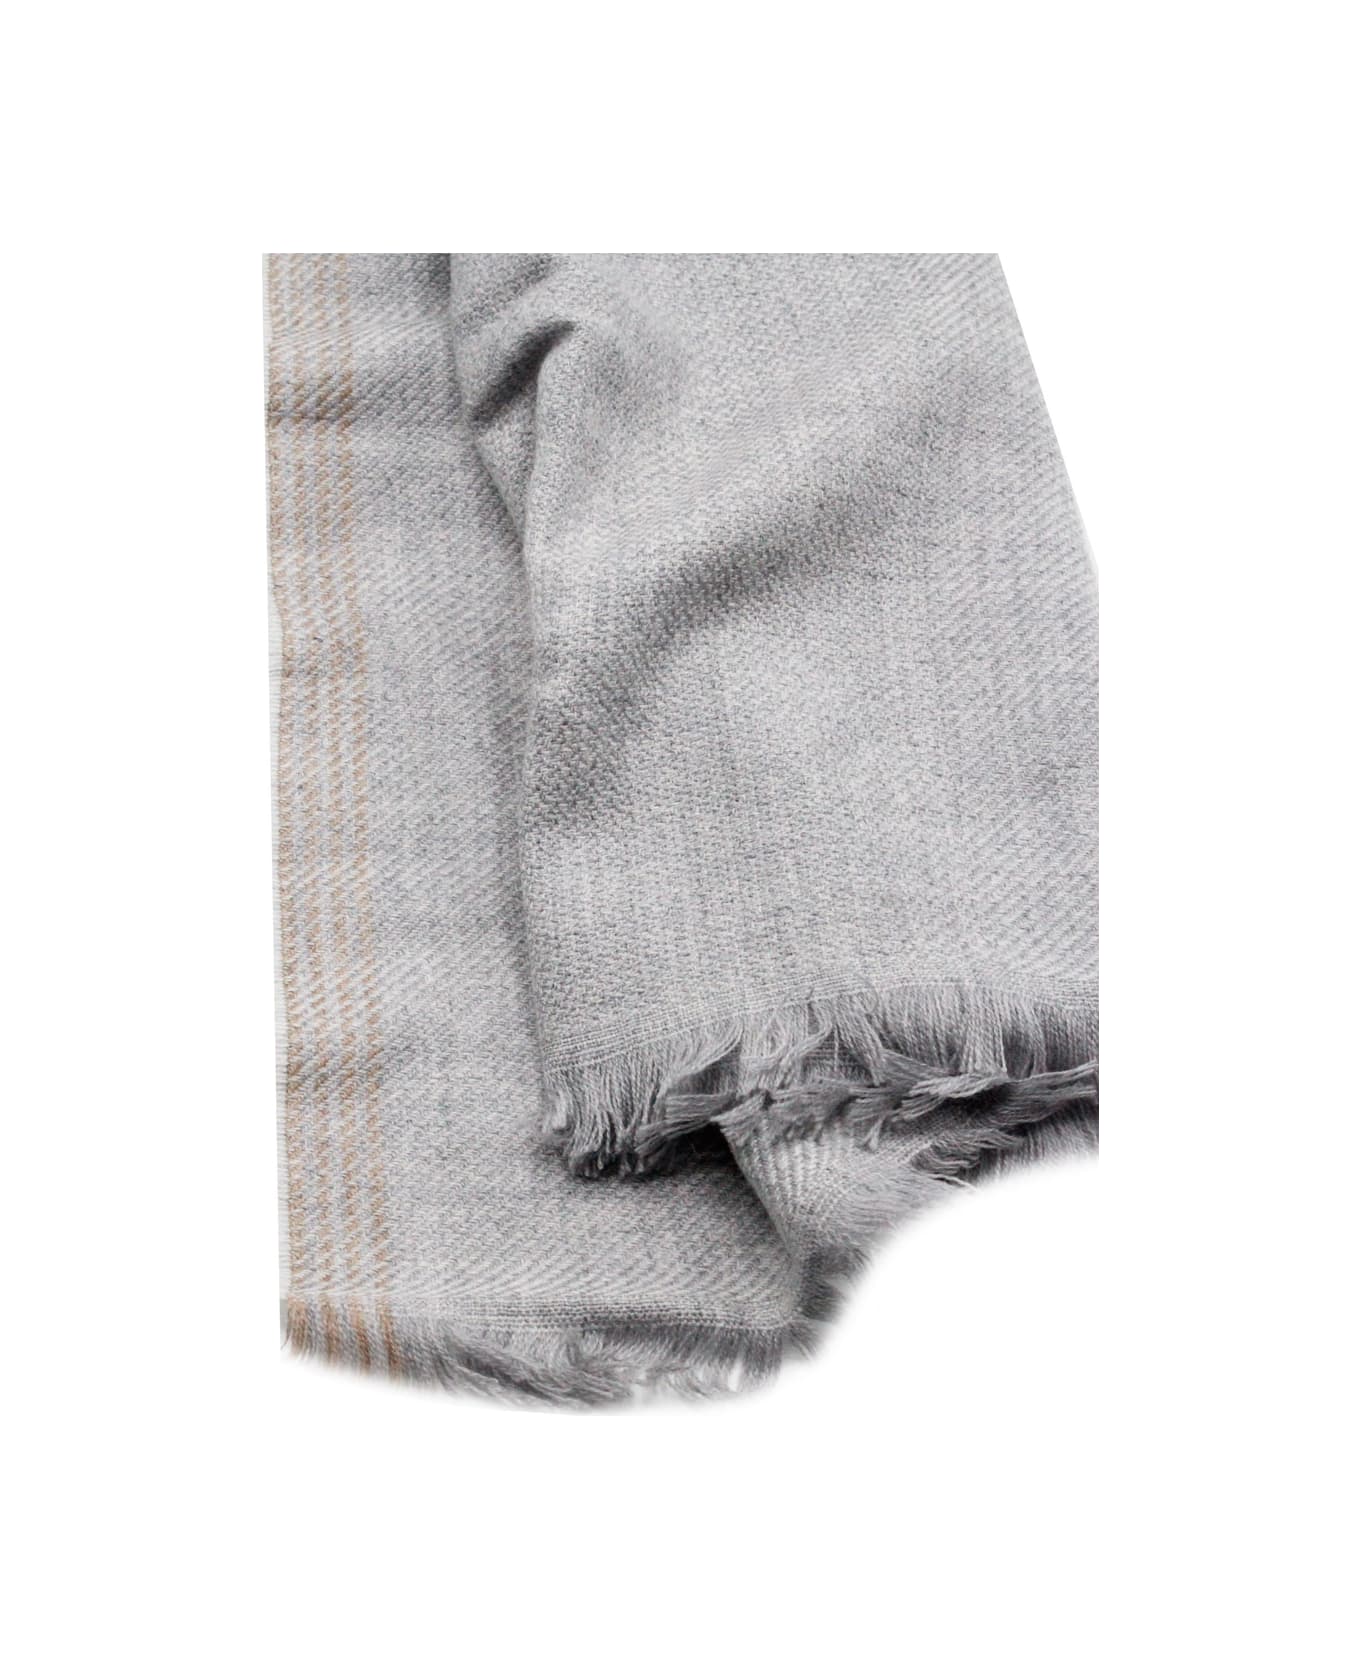 Brunello Cucinelli Lightweight Scarf Made Of Wool And Cashmere With A Light Weave In Diagonaòle And Side Selvedge With Small Fringes At The Bottom - Grey